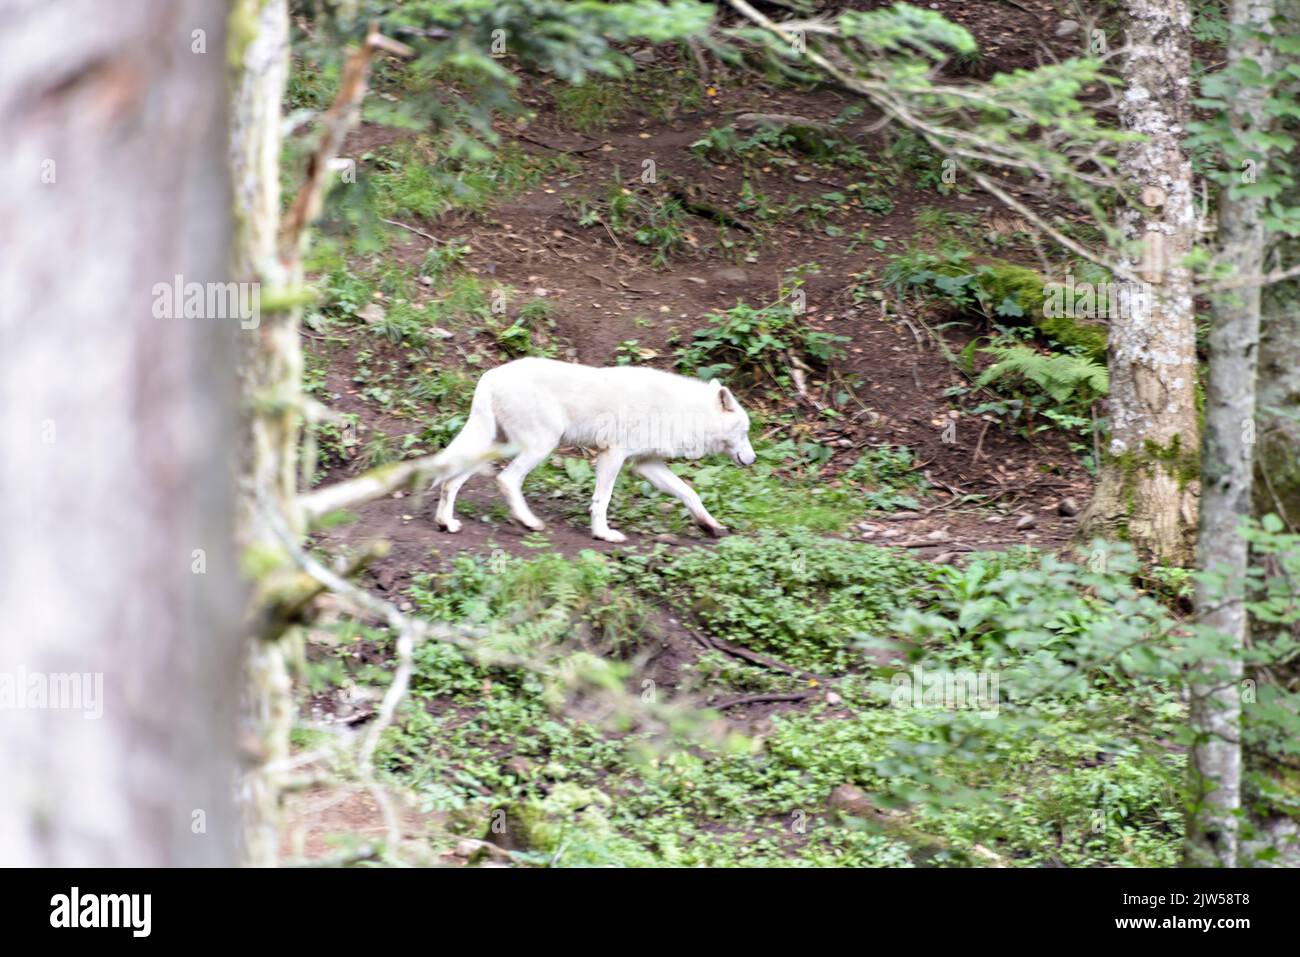 The Arctic wolf Canis lupus arctos, also known as the white wolf or polar wolf. Stock Photo